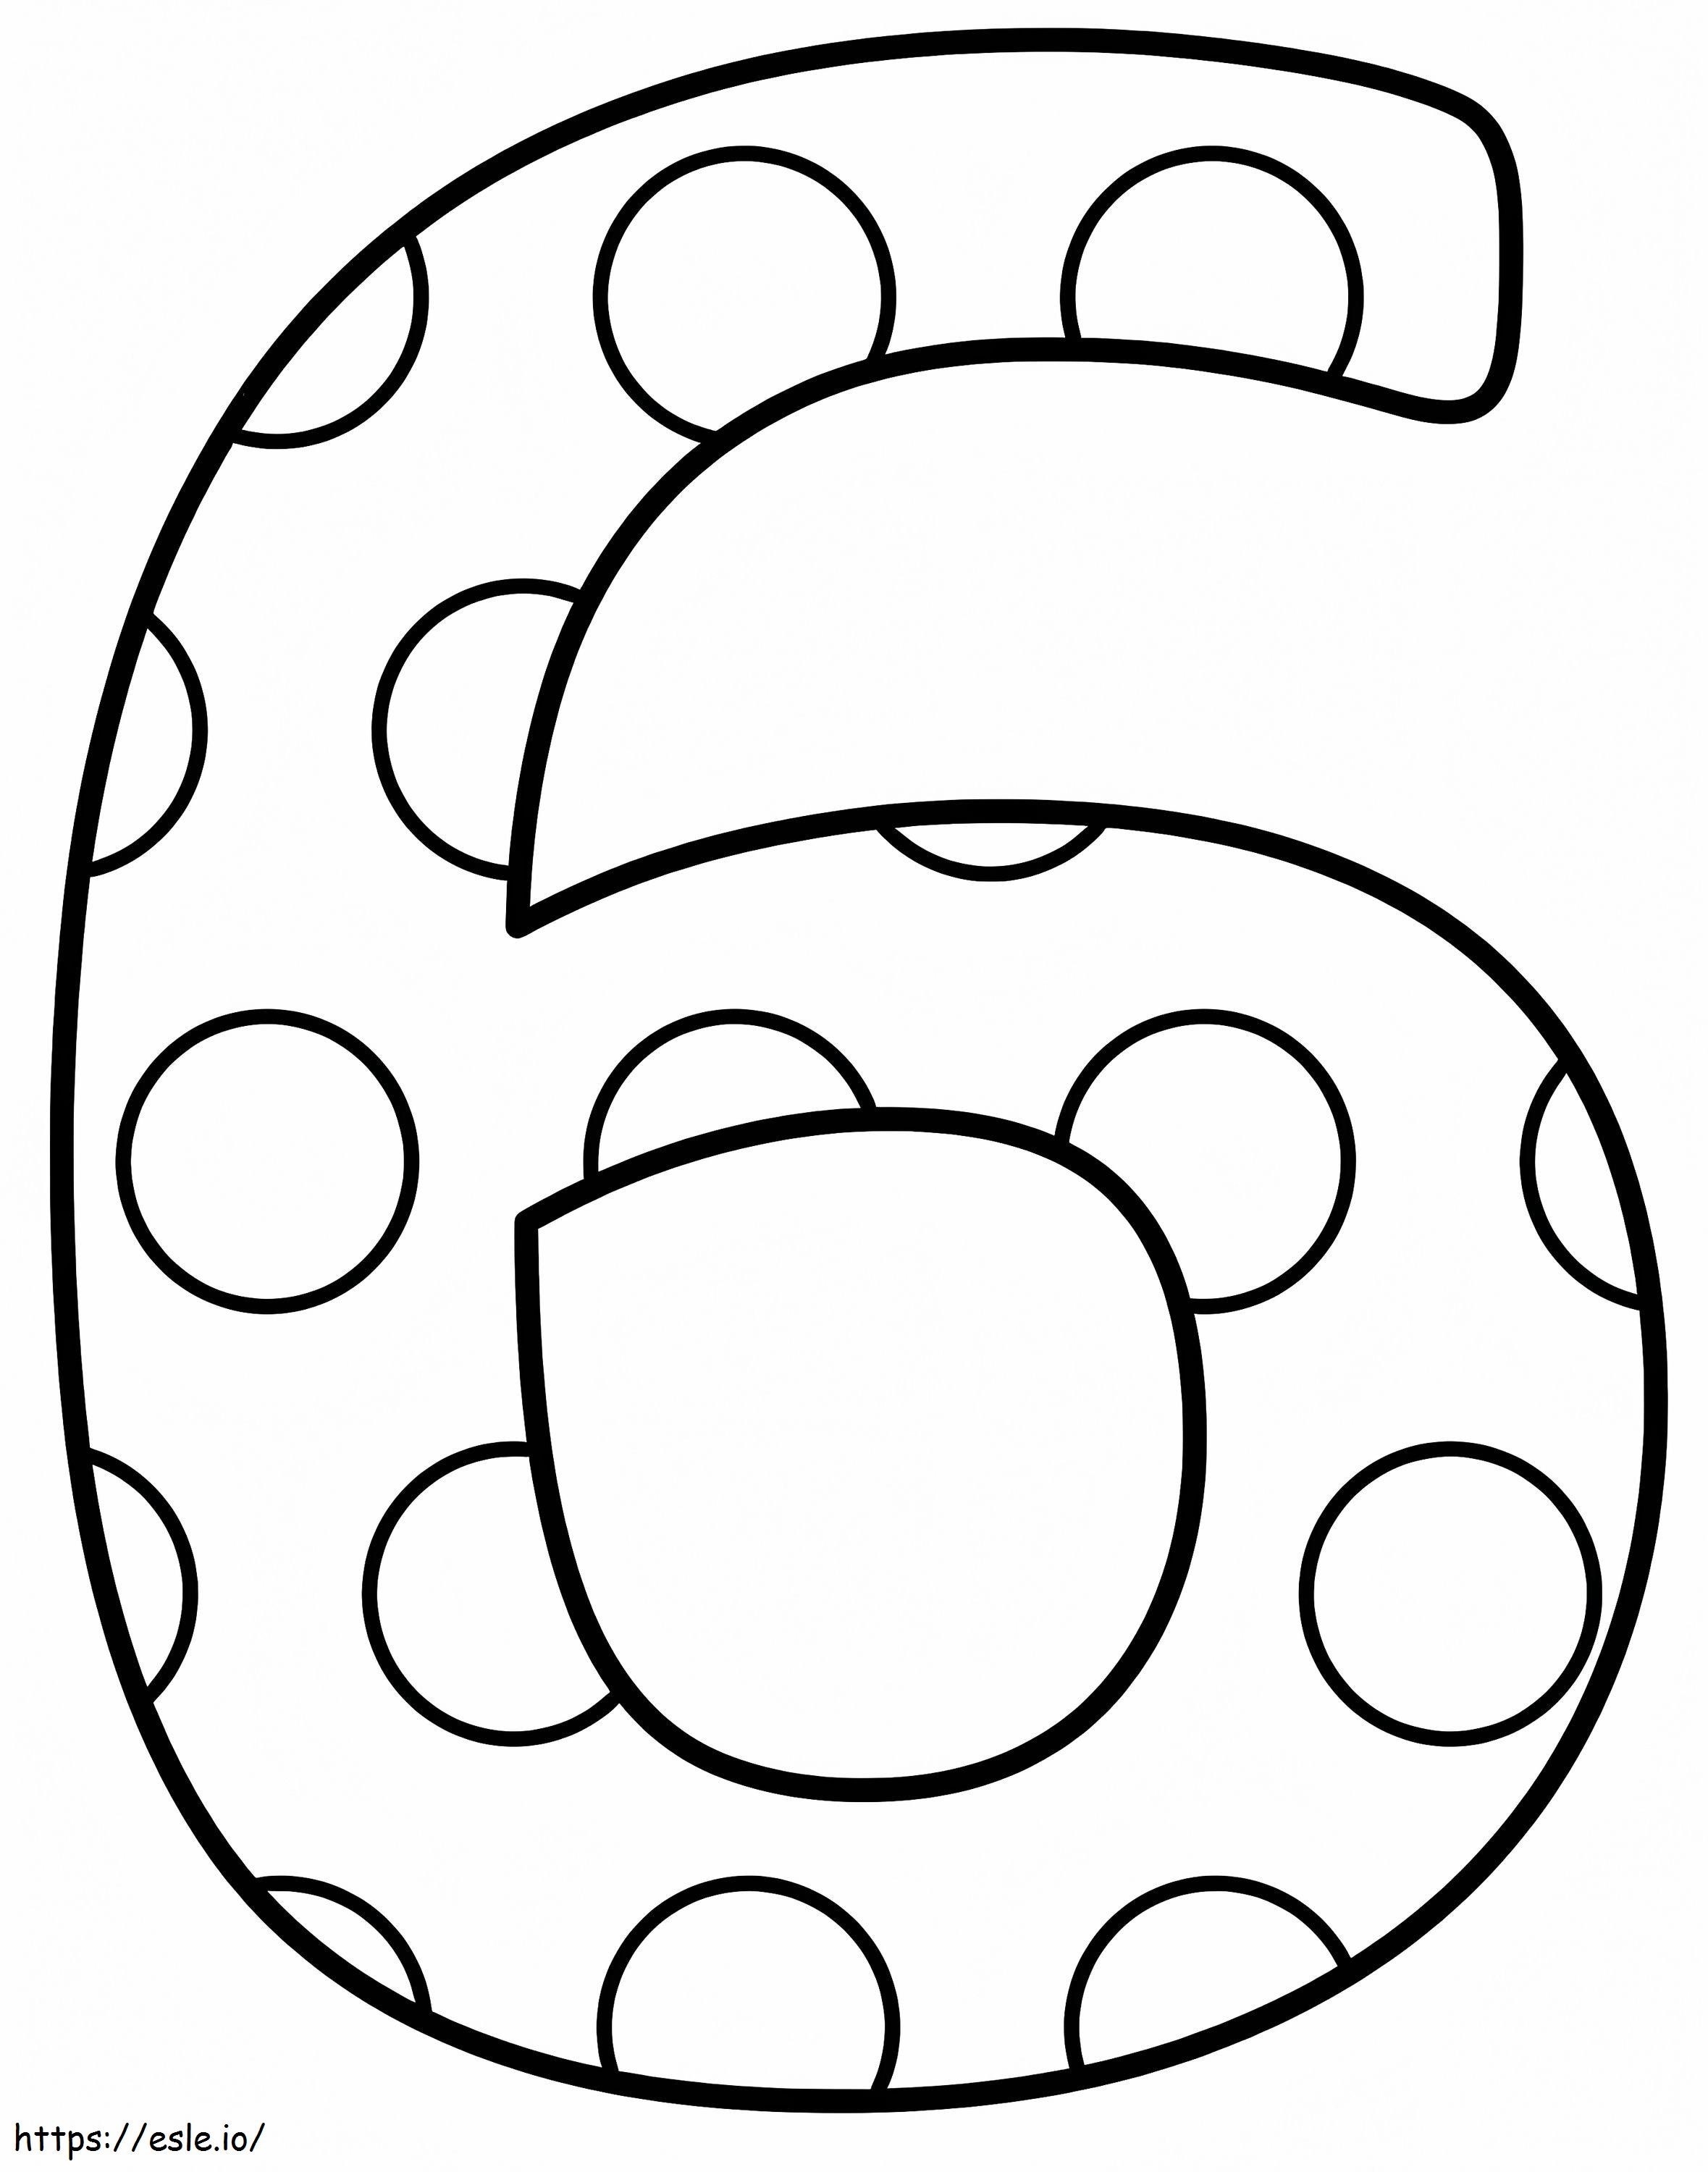 Number printable coloring page